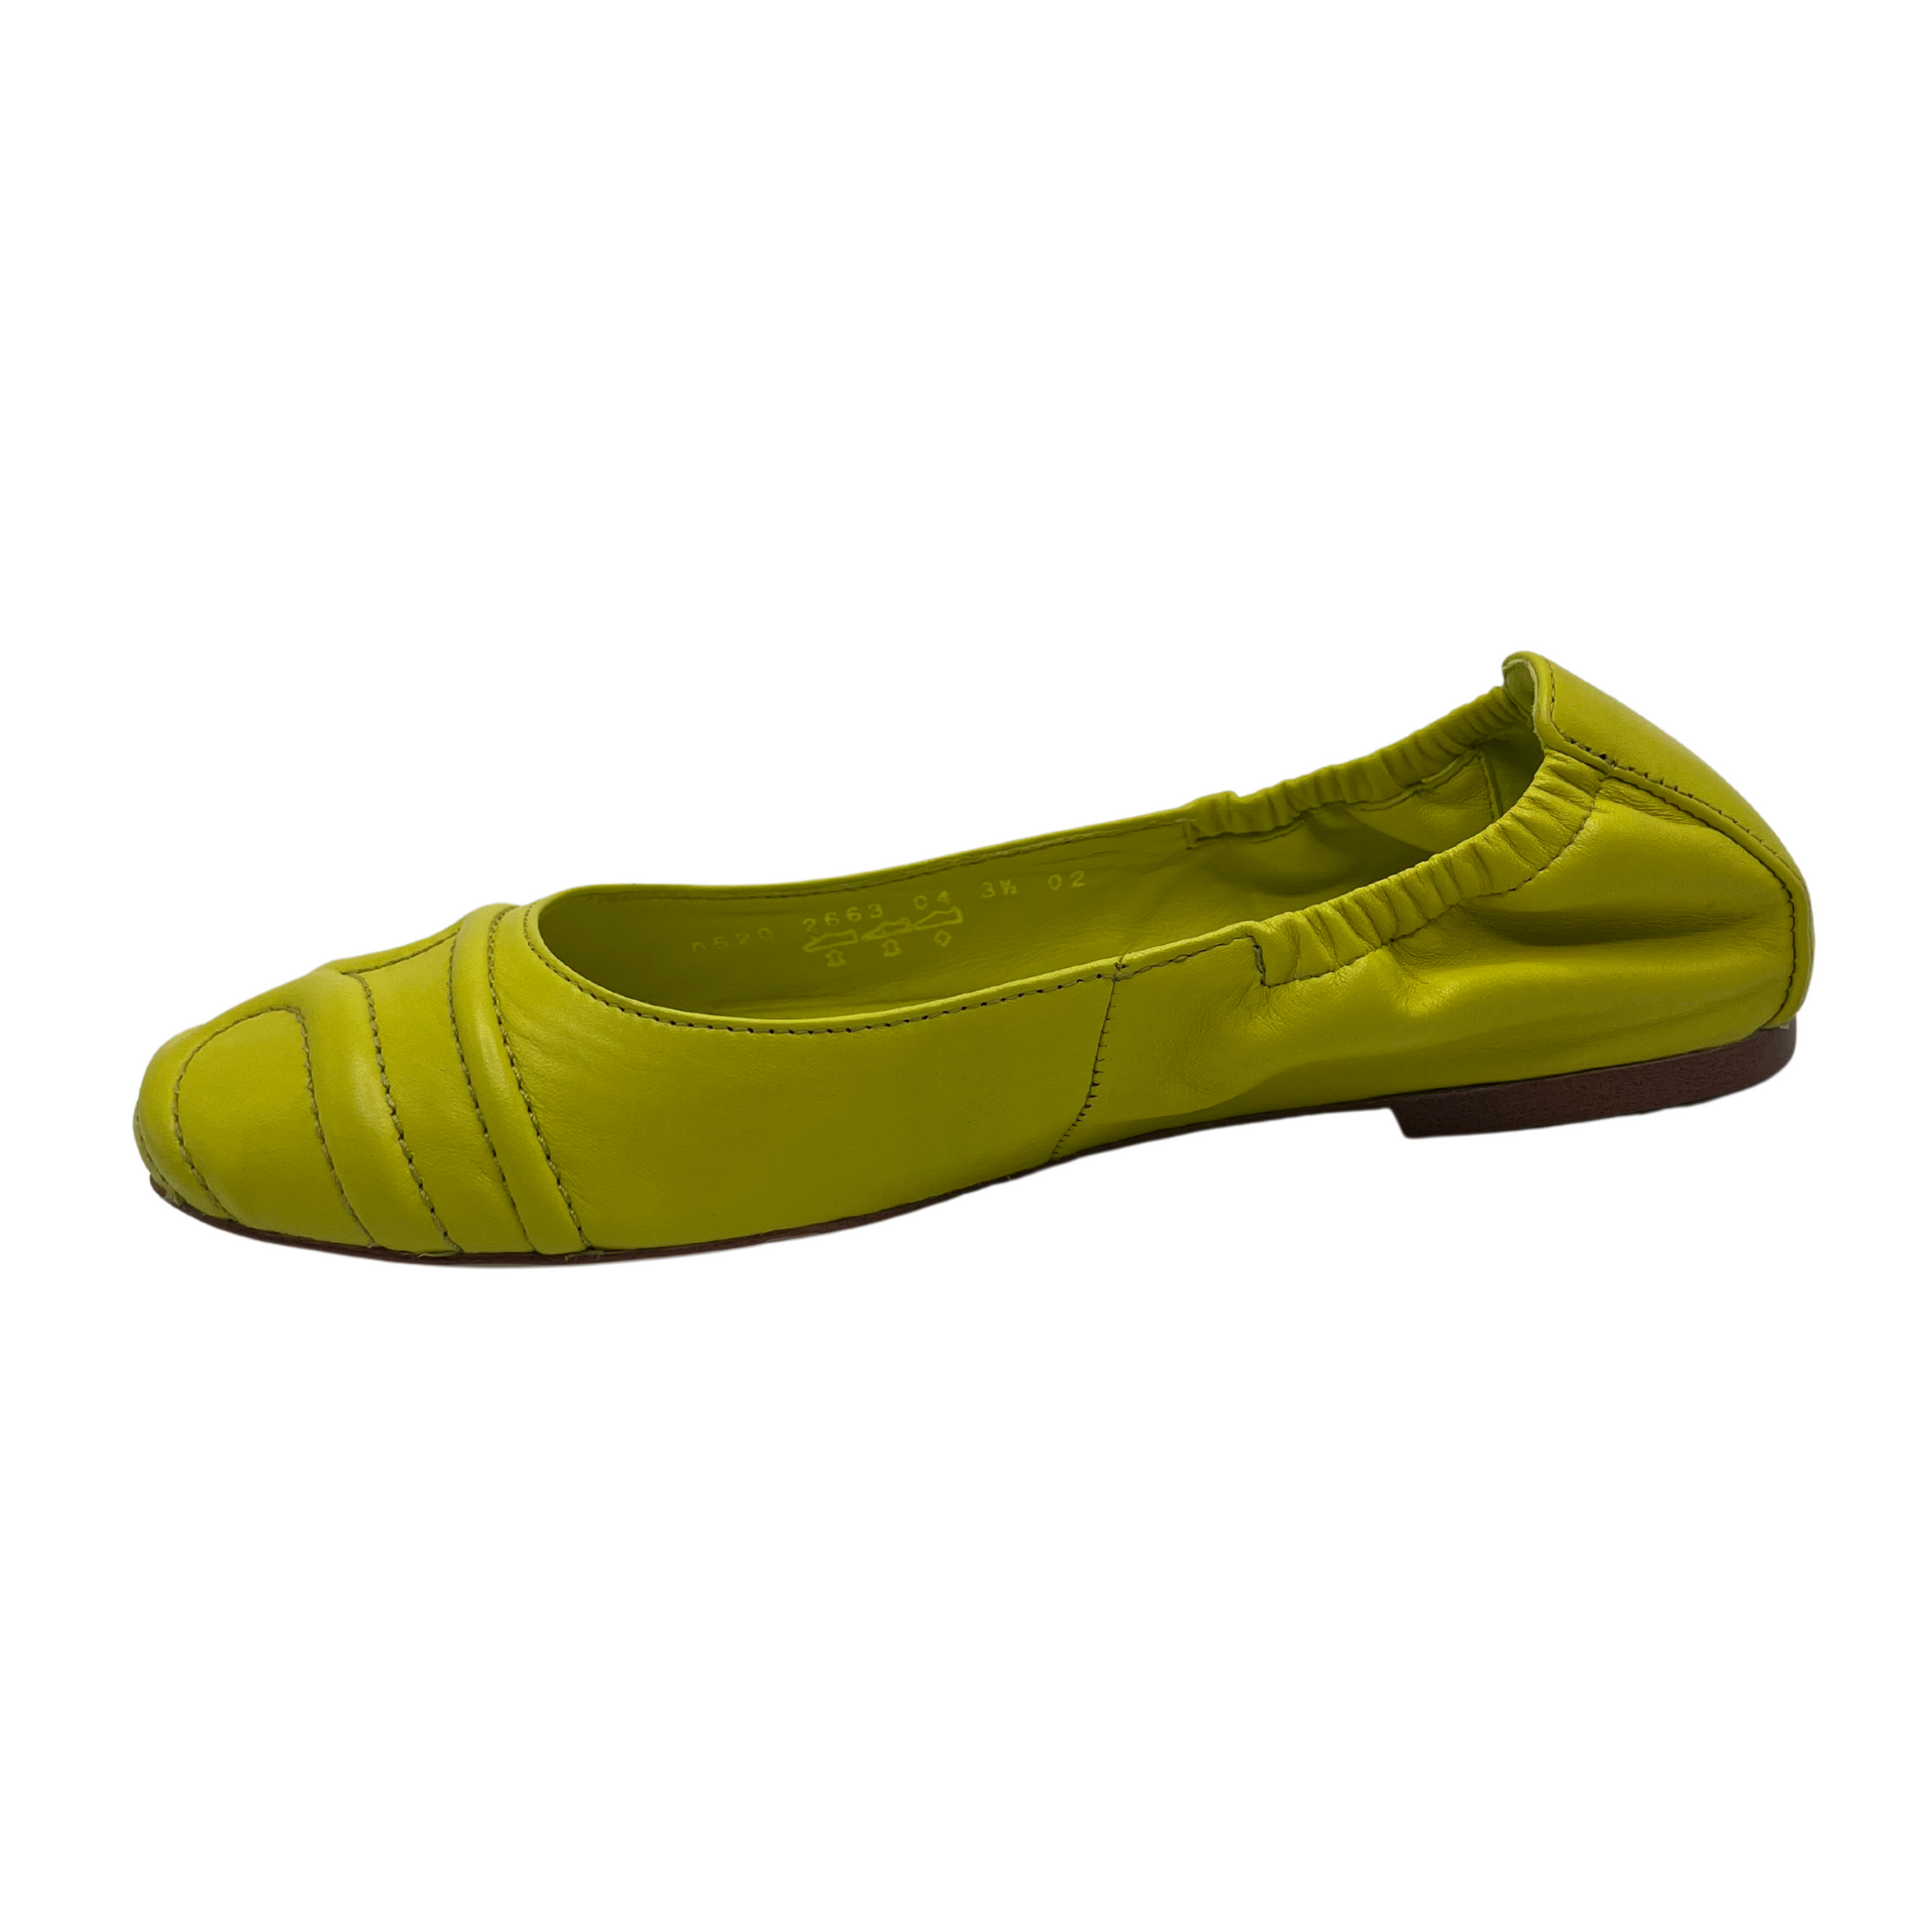 Left facing view of lime leather ballet flats with a rounded toe and elasticated back